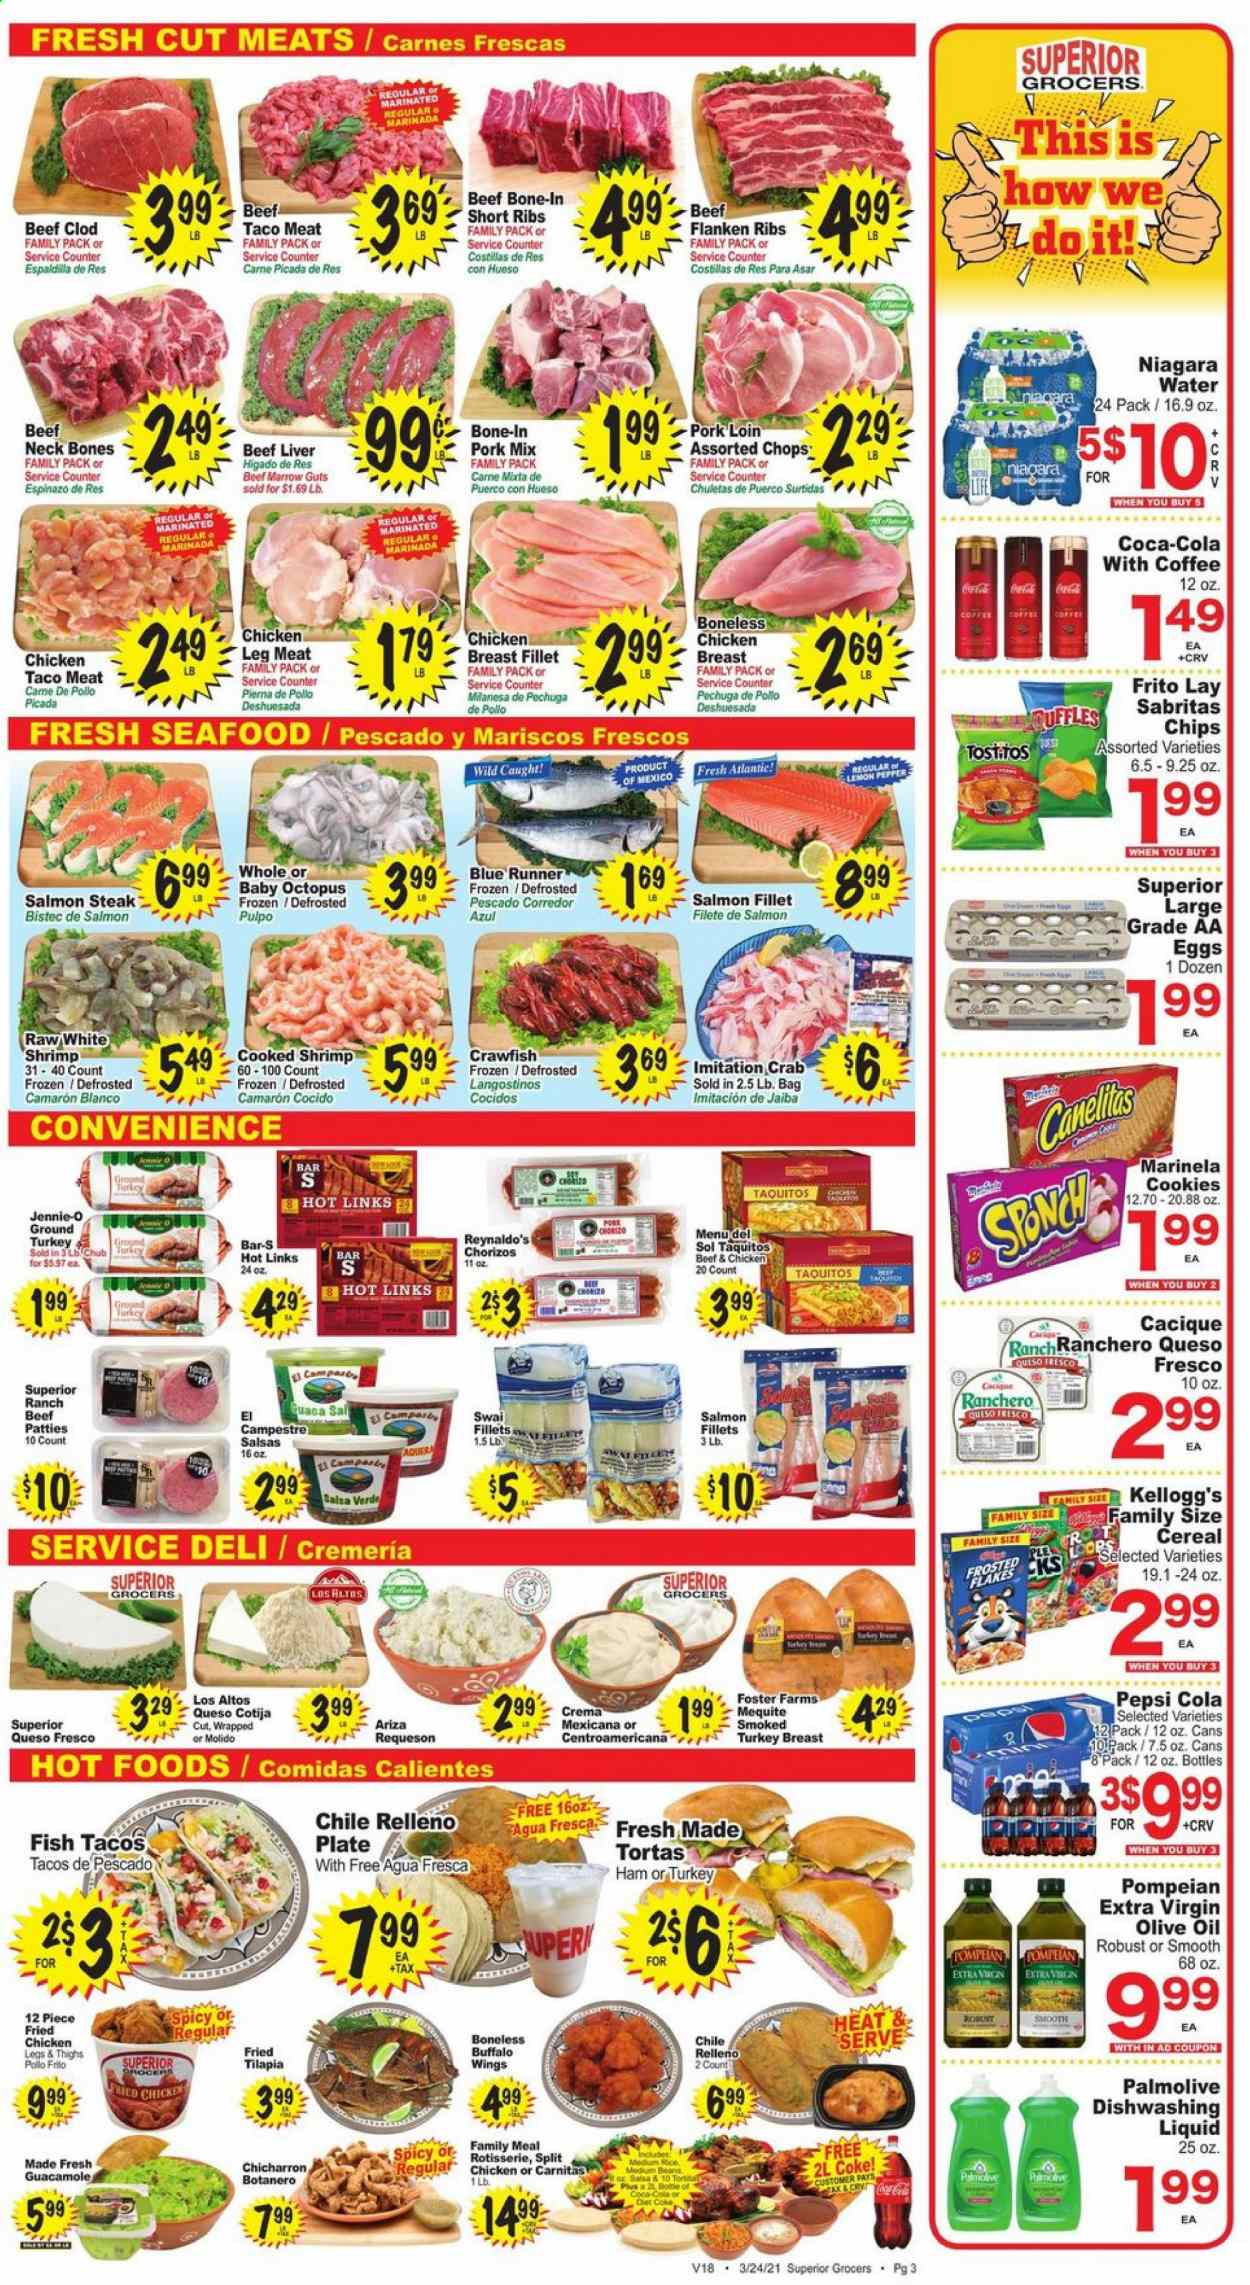 thumbnail - Superior Grocers Flyer - 03/24/2021 - 03/30/2021 - Sales products - tacos, ground turkey, turkey breast, chicken breasts, chicken legs, beef liver, beef meat, steak, pork loin, pork meat, salmon, salmon fillet, tilapia, octopus, seafood, crab, fish, shrimps, swai fillet, fried chicken, Menu Del Sol, taquitos, ham, chorizo, guacamole, queso fresco, eggs, salsa, beans, crawfish, cookies, Kellogg's, cereals, Frosted Flakes, extra virgin olive oil, olive oil, Coca-Cola, Pepsi, Diet Coke, coffee, Palmolive, plate. Page 3.